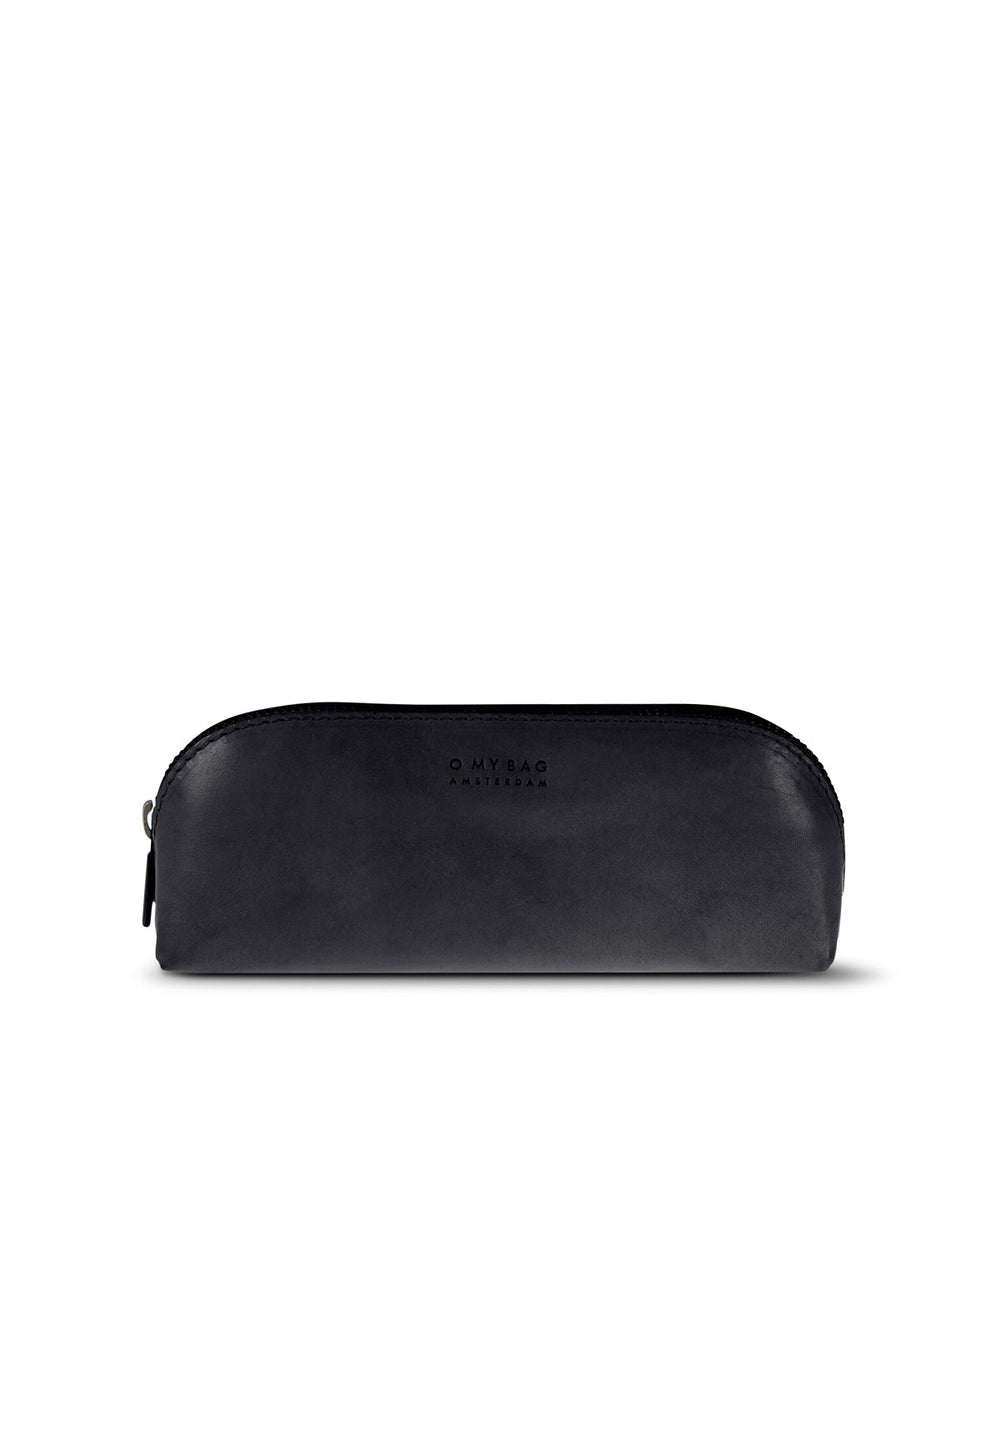 PENCIL CASE LARGE BLACK CLASSIC LEATHER - Moeon